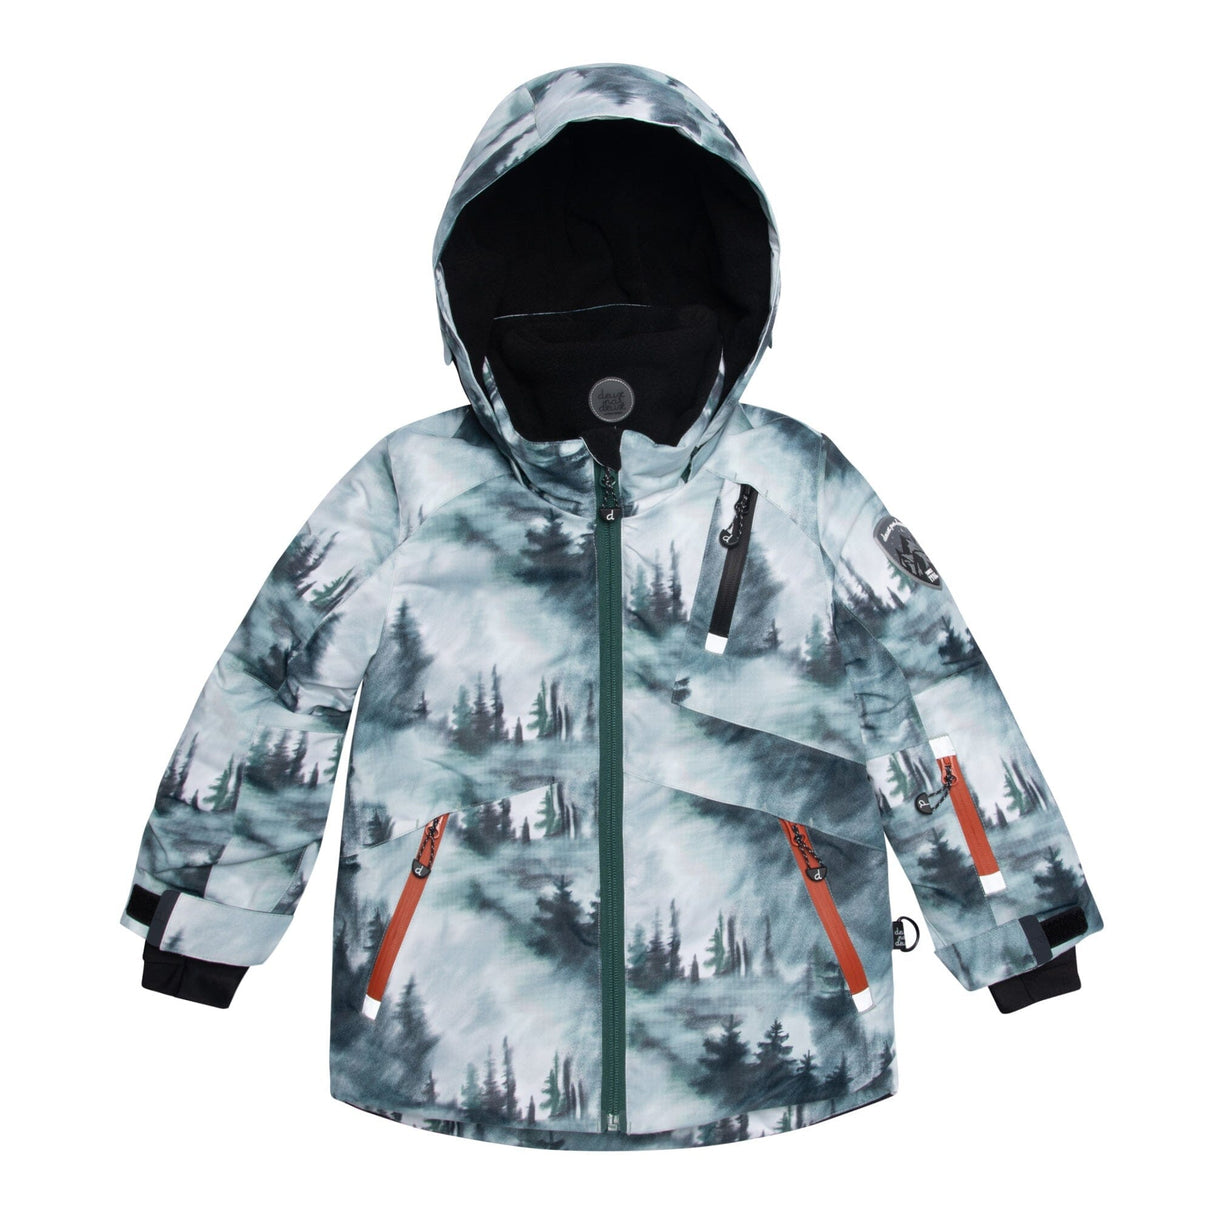 Two Piece Snowsuit Black With Forest Print-5